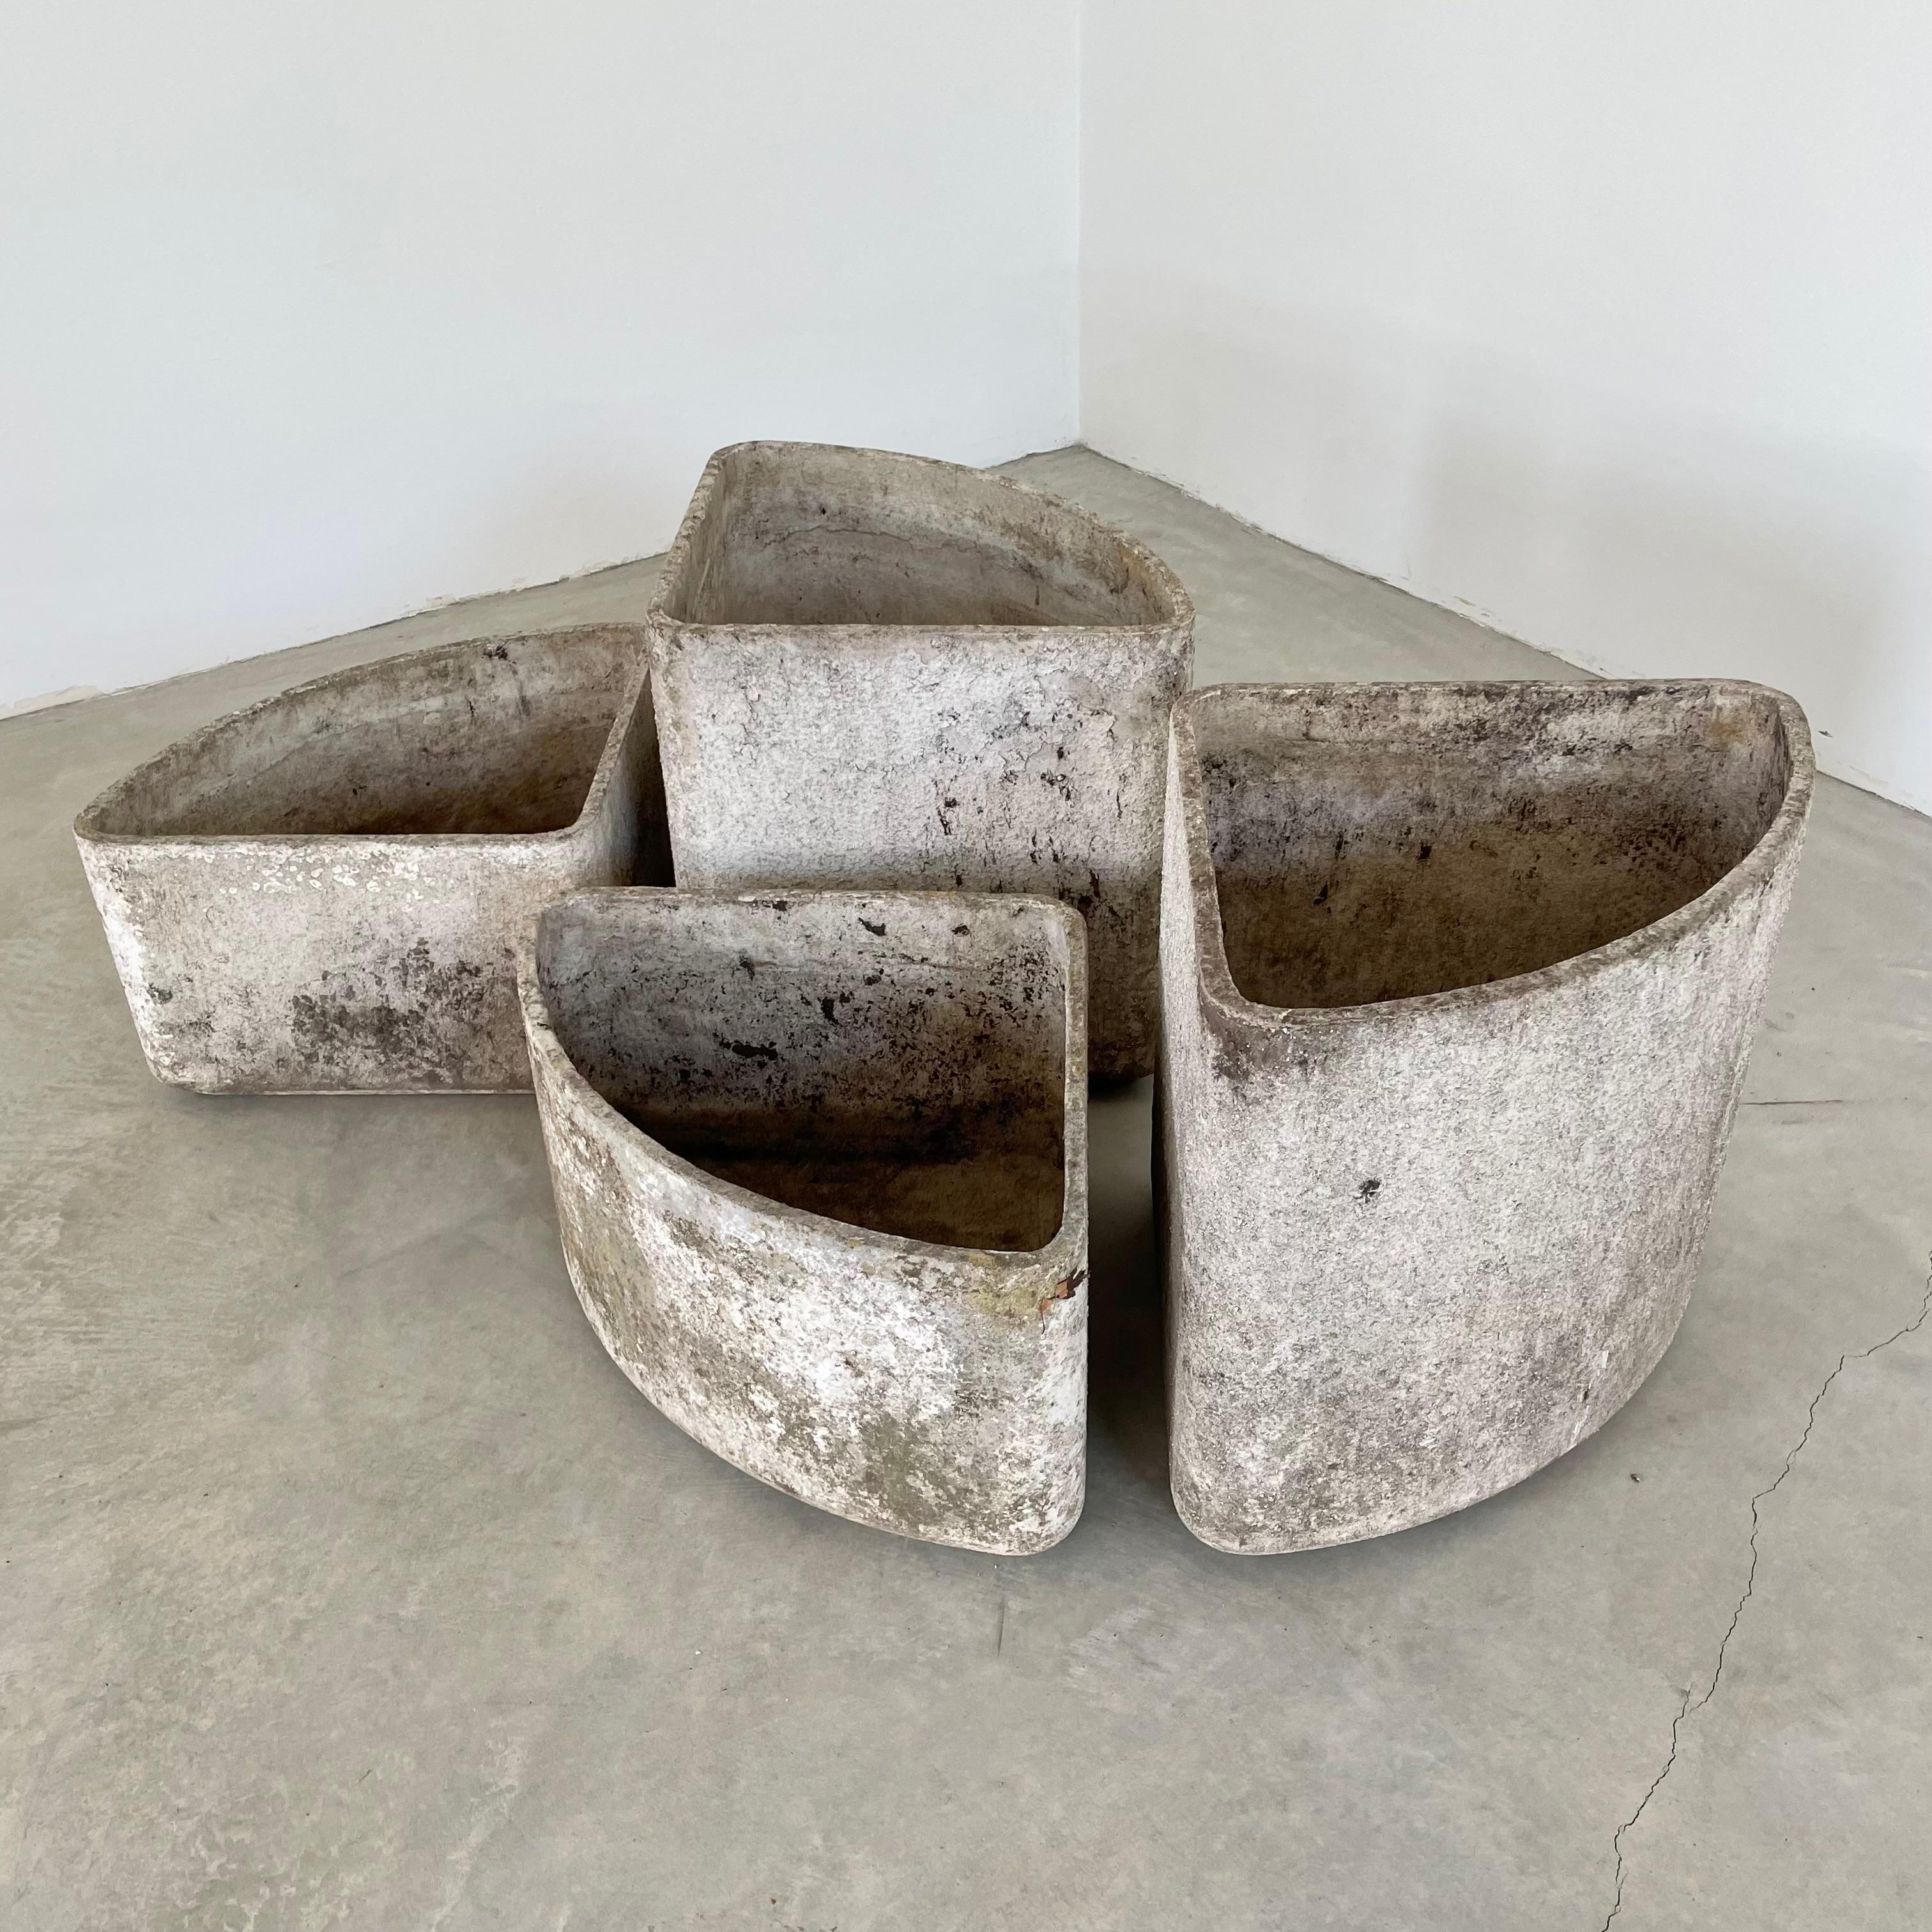 Beautiful set of triangular concrete planters by Swiss Architect Willy Guhl. 4 triangles in two different heights, with the same depth and width. Pieces can be arranged in a multitude of ways. Each triangle sits atop a small indented platform. All